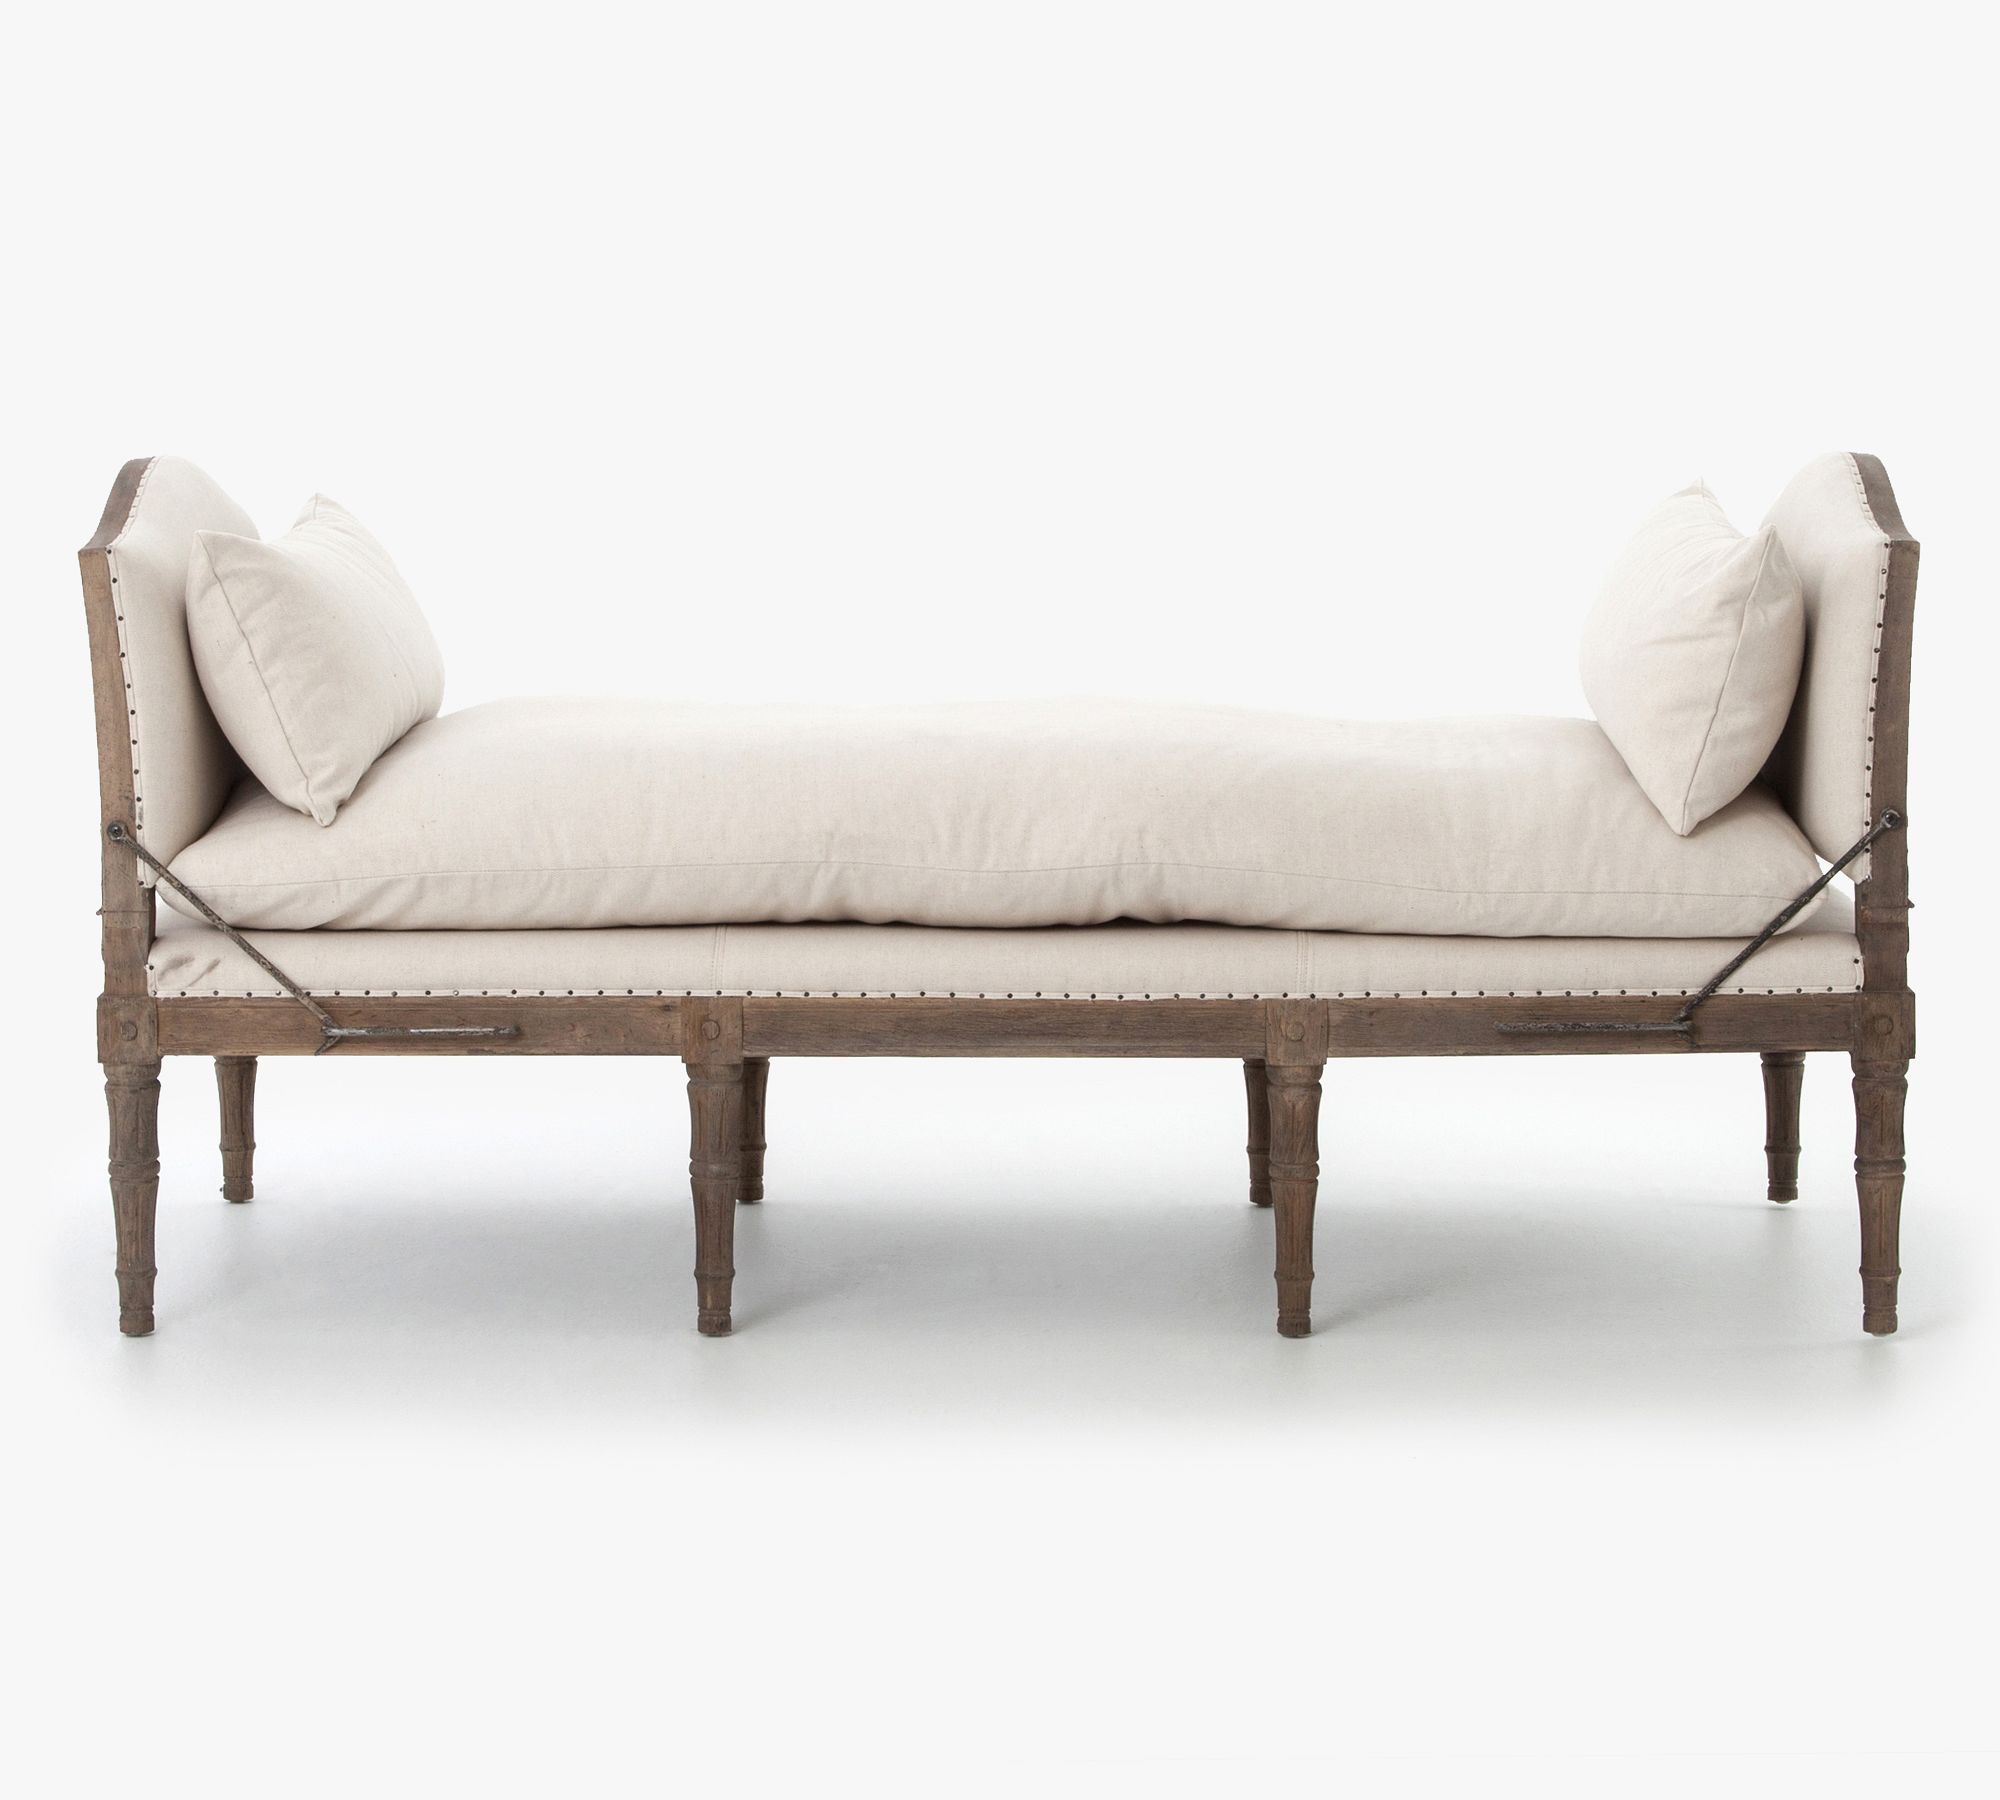 Miller Chaise Lounge